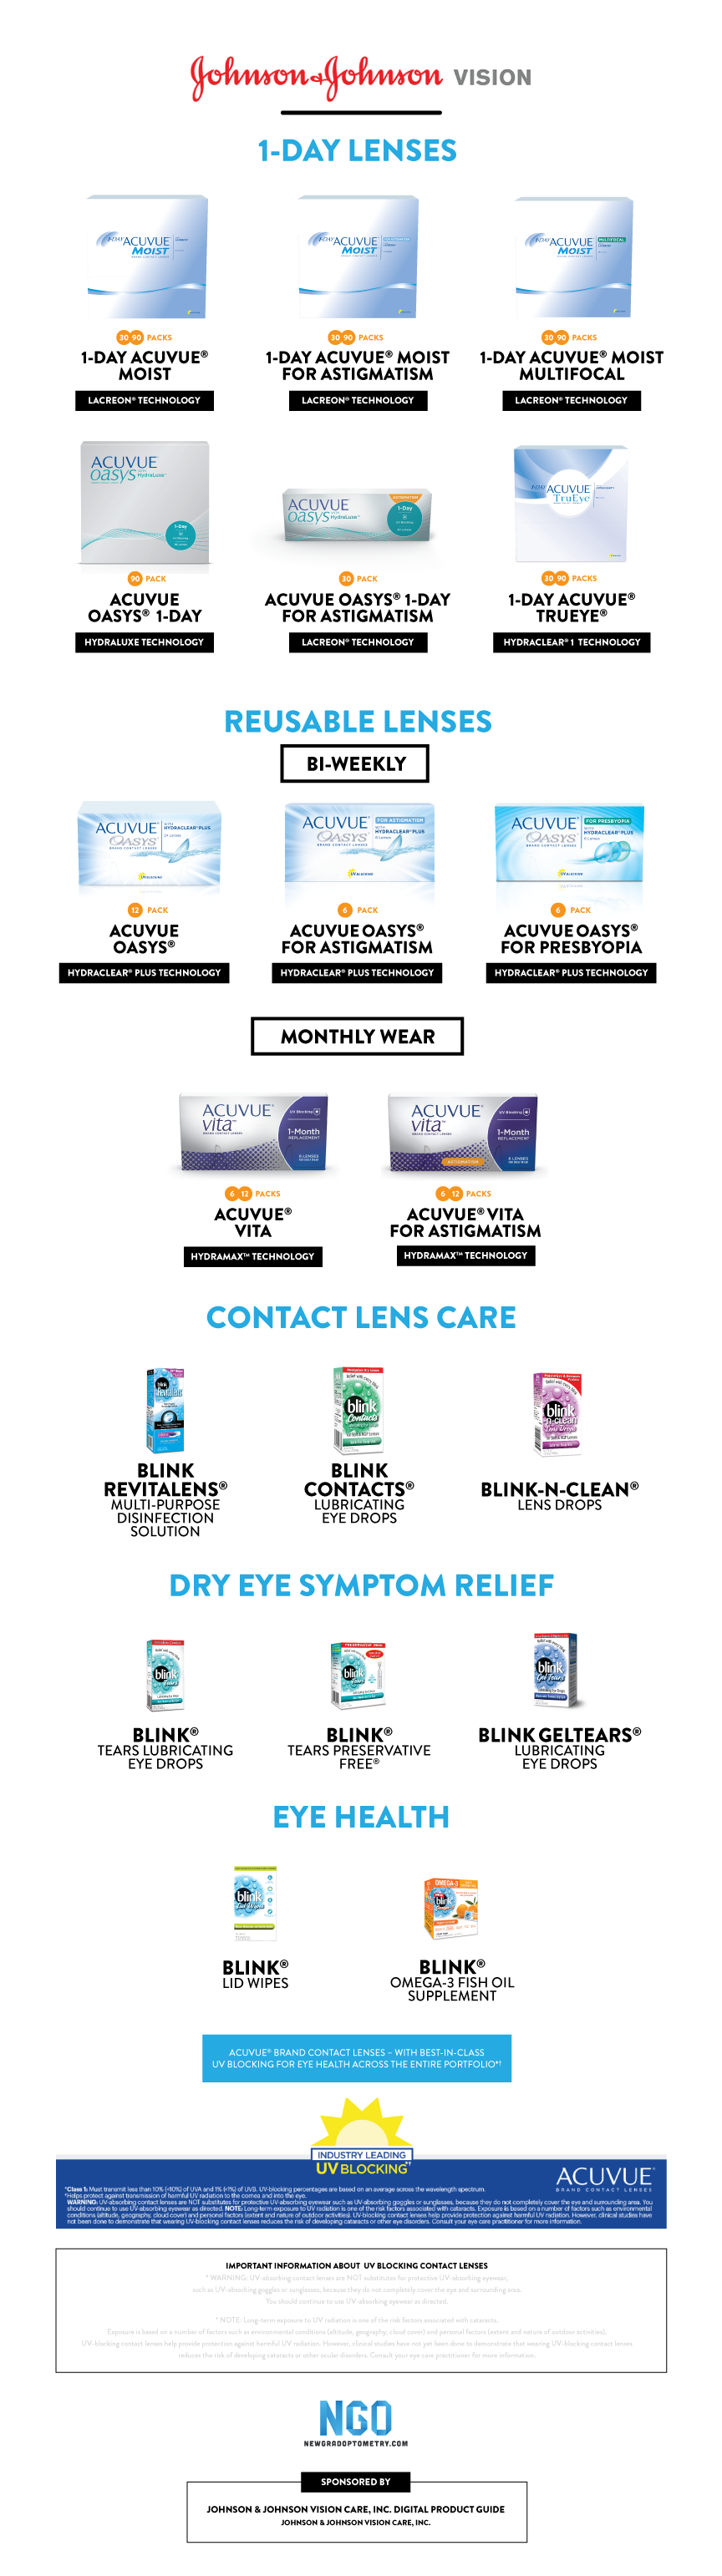 https://covalentcareers3.s3.amazonaws.com/media/wp-legacy/uploads/2018/01/Contact-Lens-Options-and-Consumer-Eye-Health.png